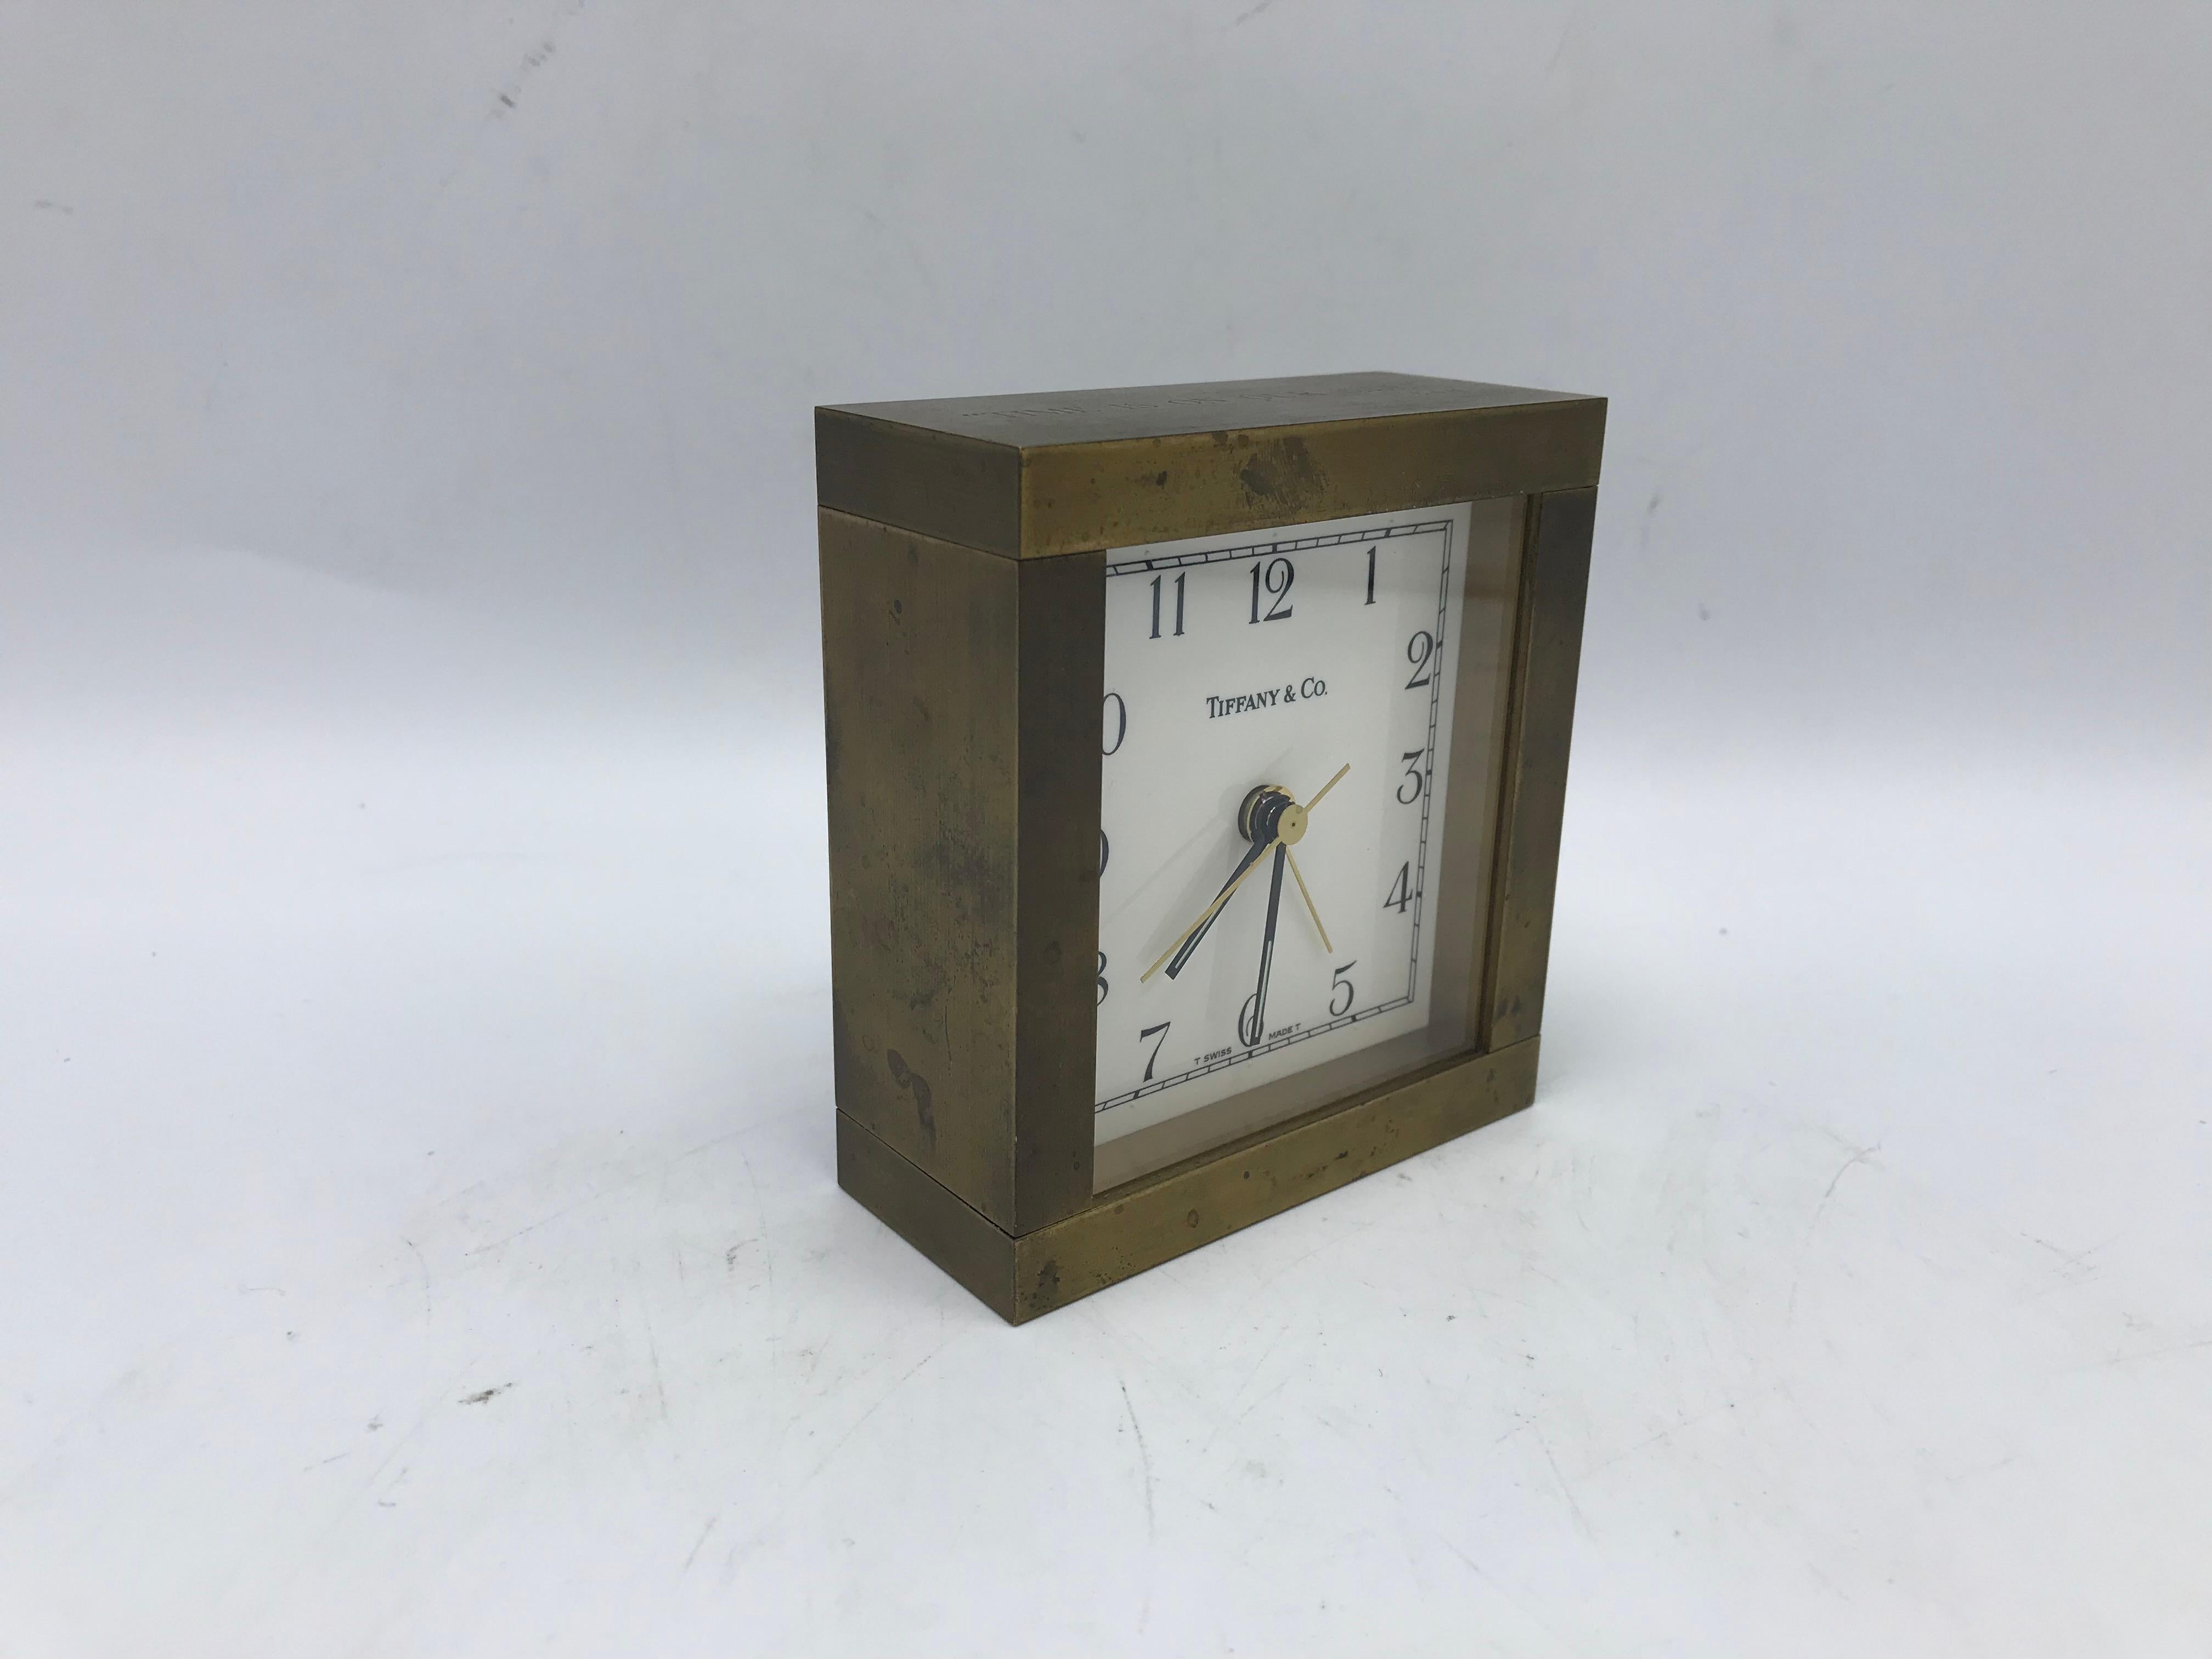 Offered is a fabulous, 1950s Tiffany & Co. modern brass desk or travel clock. Engraved along the top, 